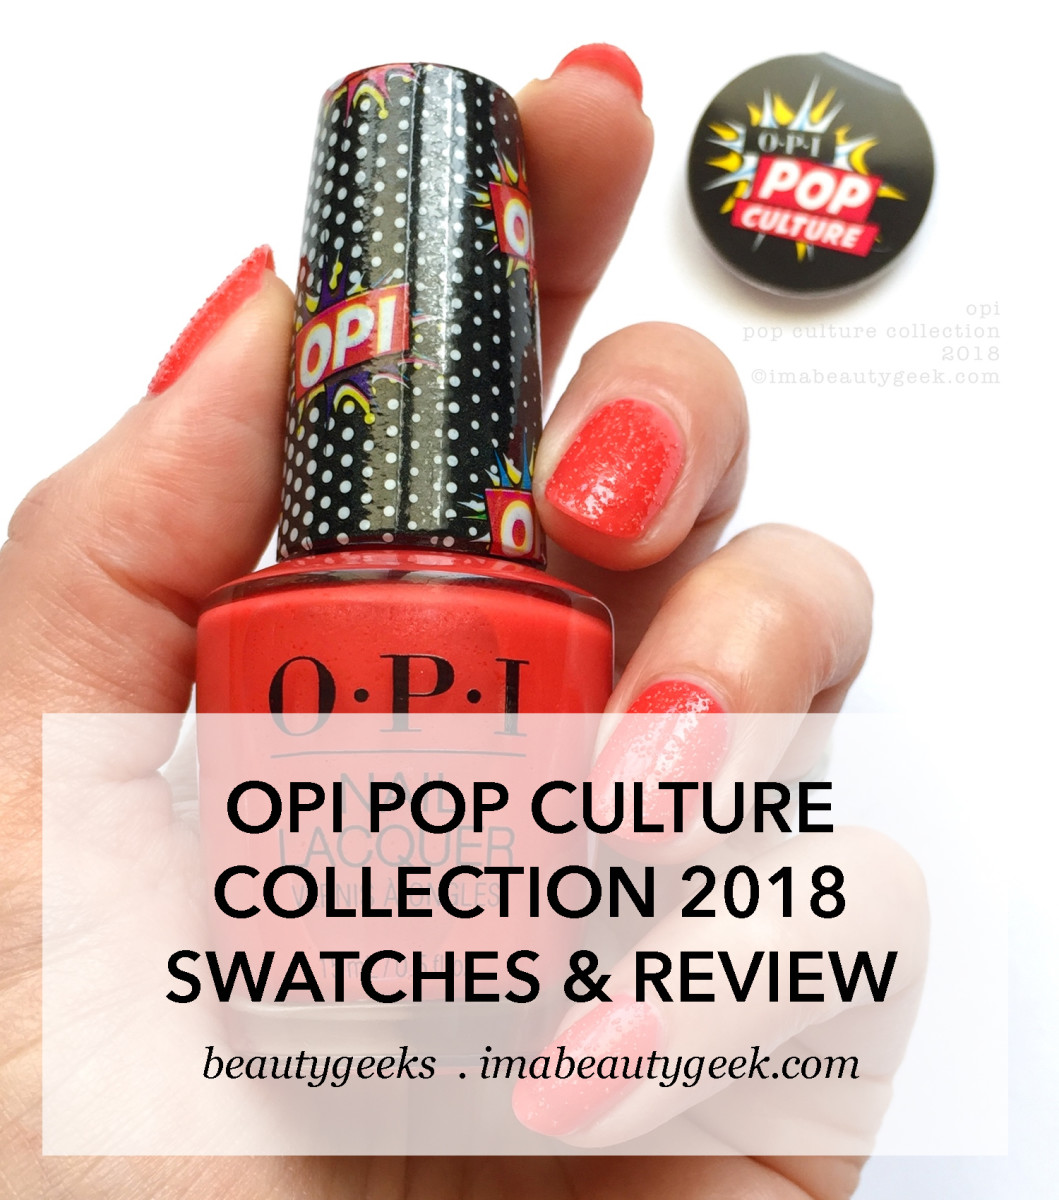 OPI Pop Culture Collection 2018 Swatches Review